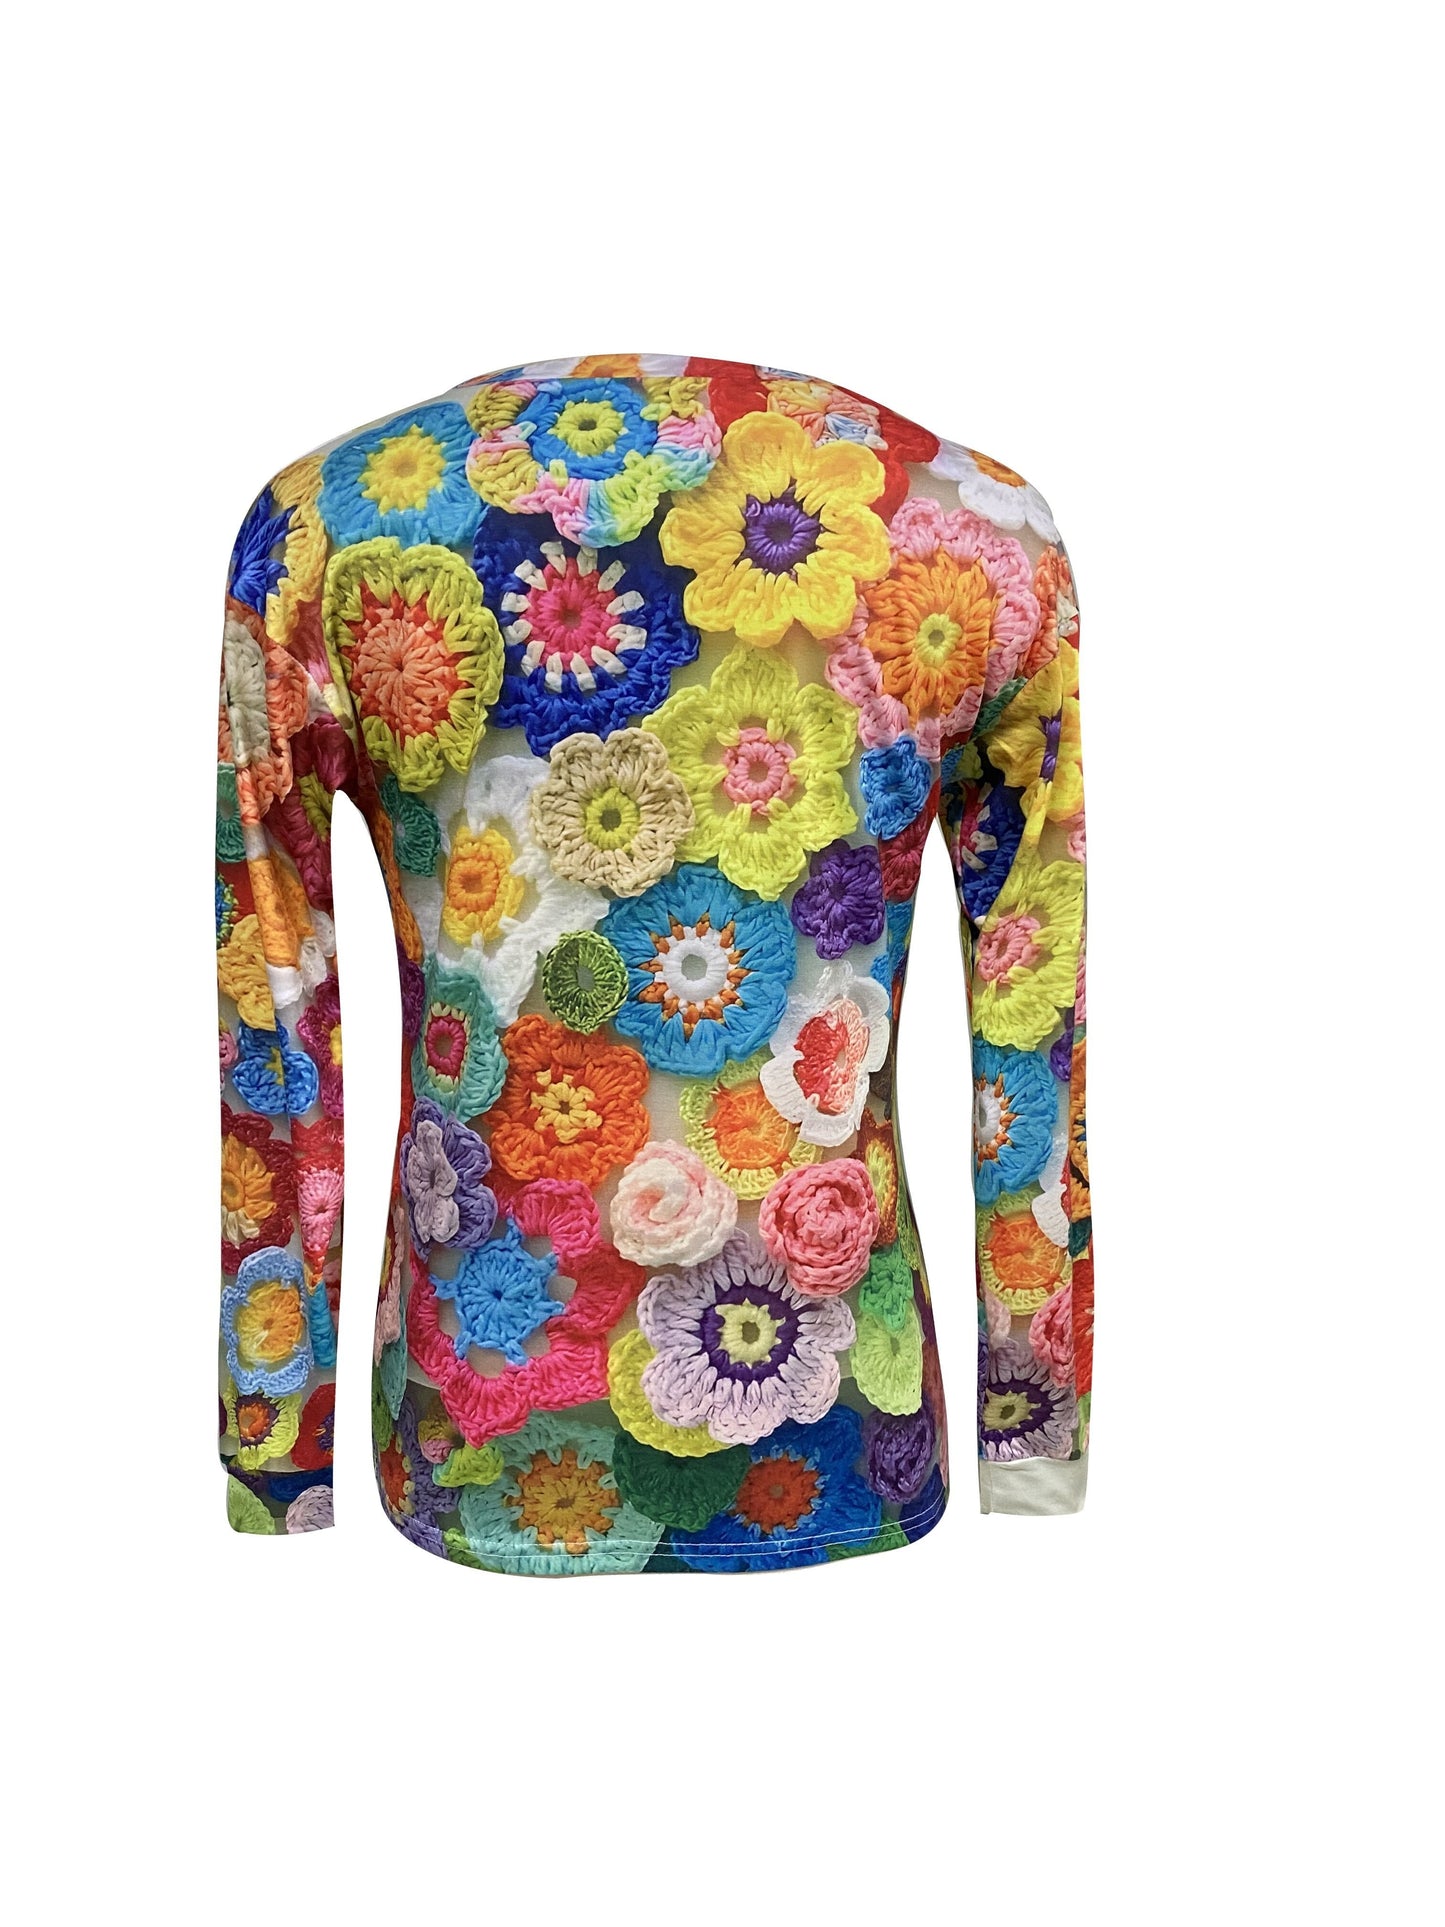 Floral Pattern Crew Neck T-Shirt, Casual Long Sleeve Top For Spring & Fall, Women's Clothing